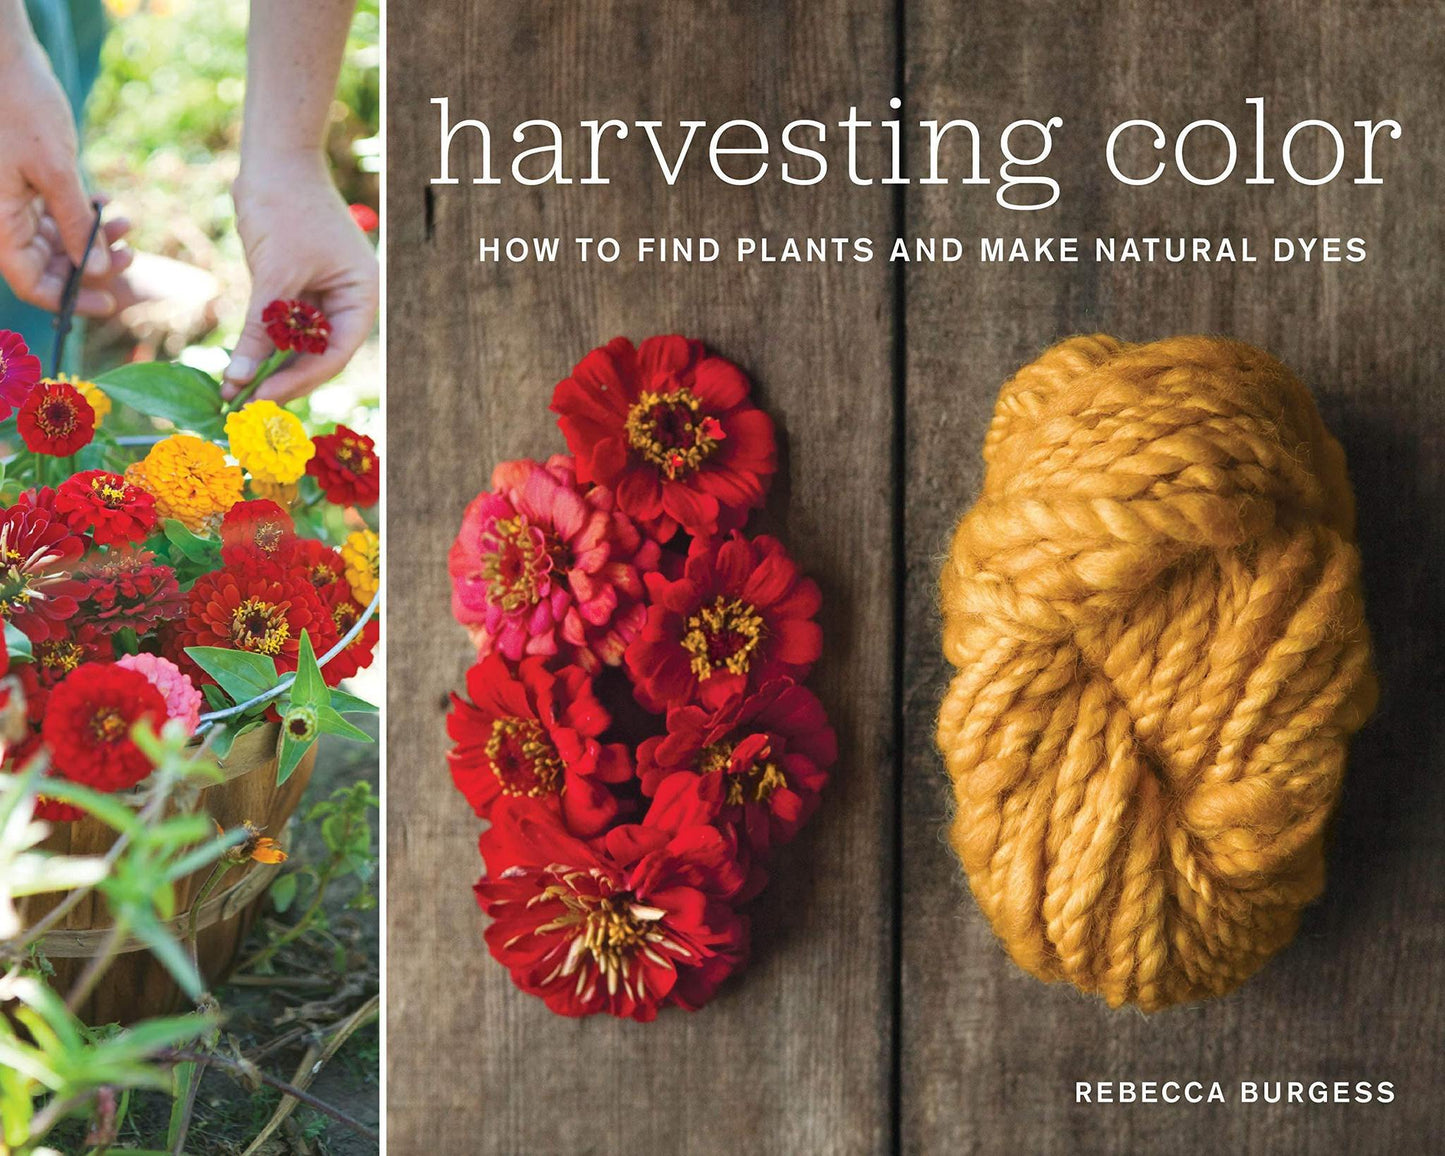 Harvesting Color - How to Find Plants and Make Natural Dyes - by Rebecca Burgess